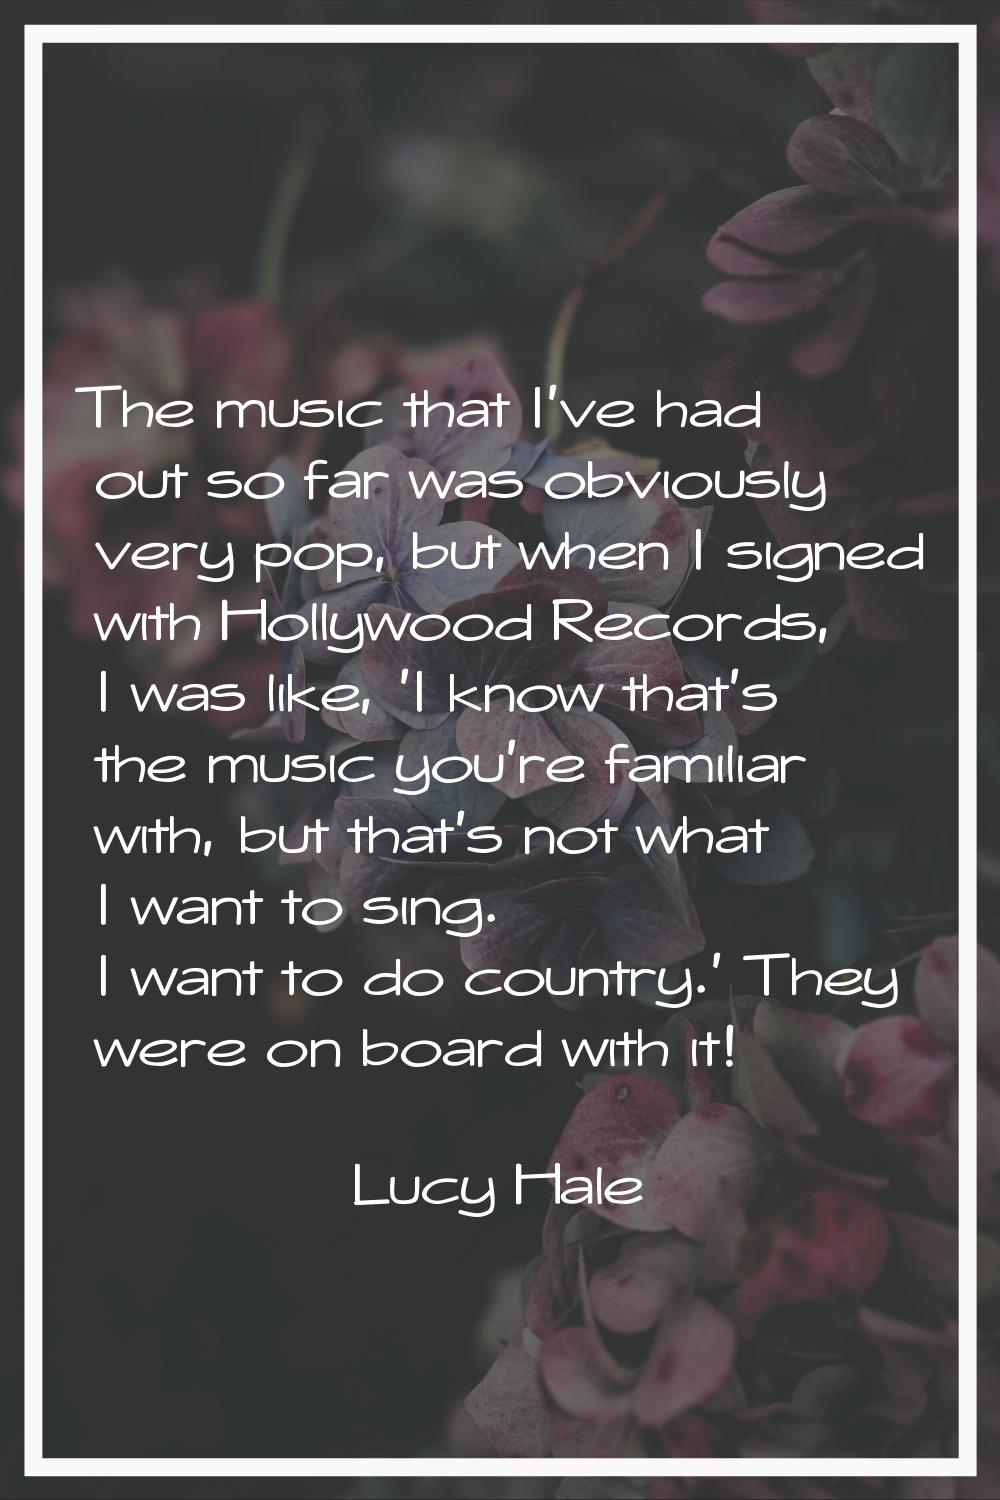 The music that I've had out so far was obviously very pop, but when I signed with Hollywood Records